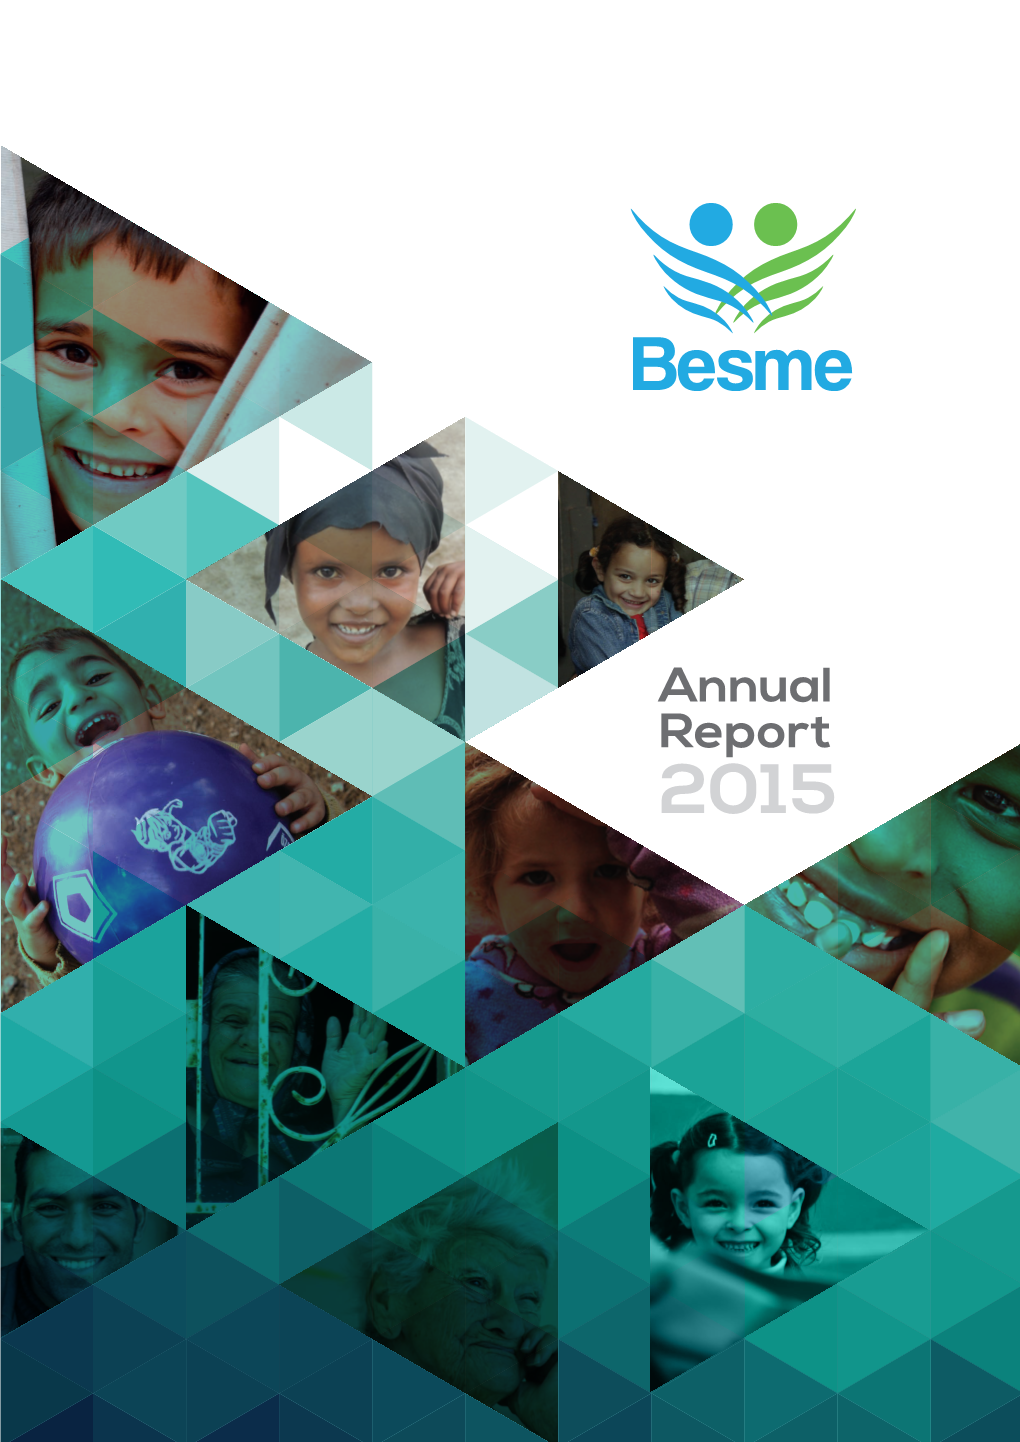 Annual Report 2015 International Group for Humanitarian Besme Assistance